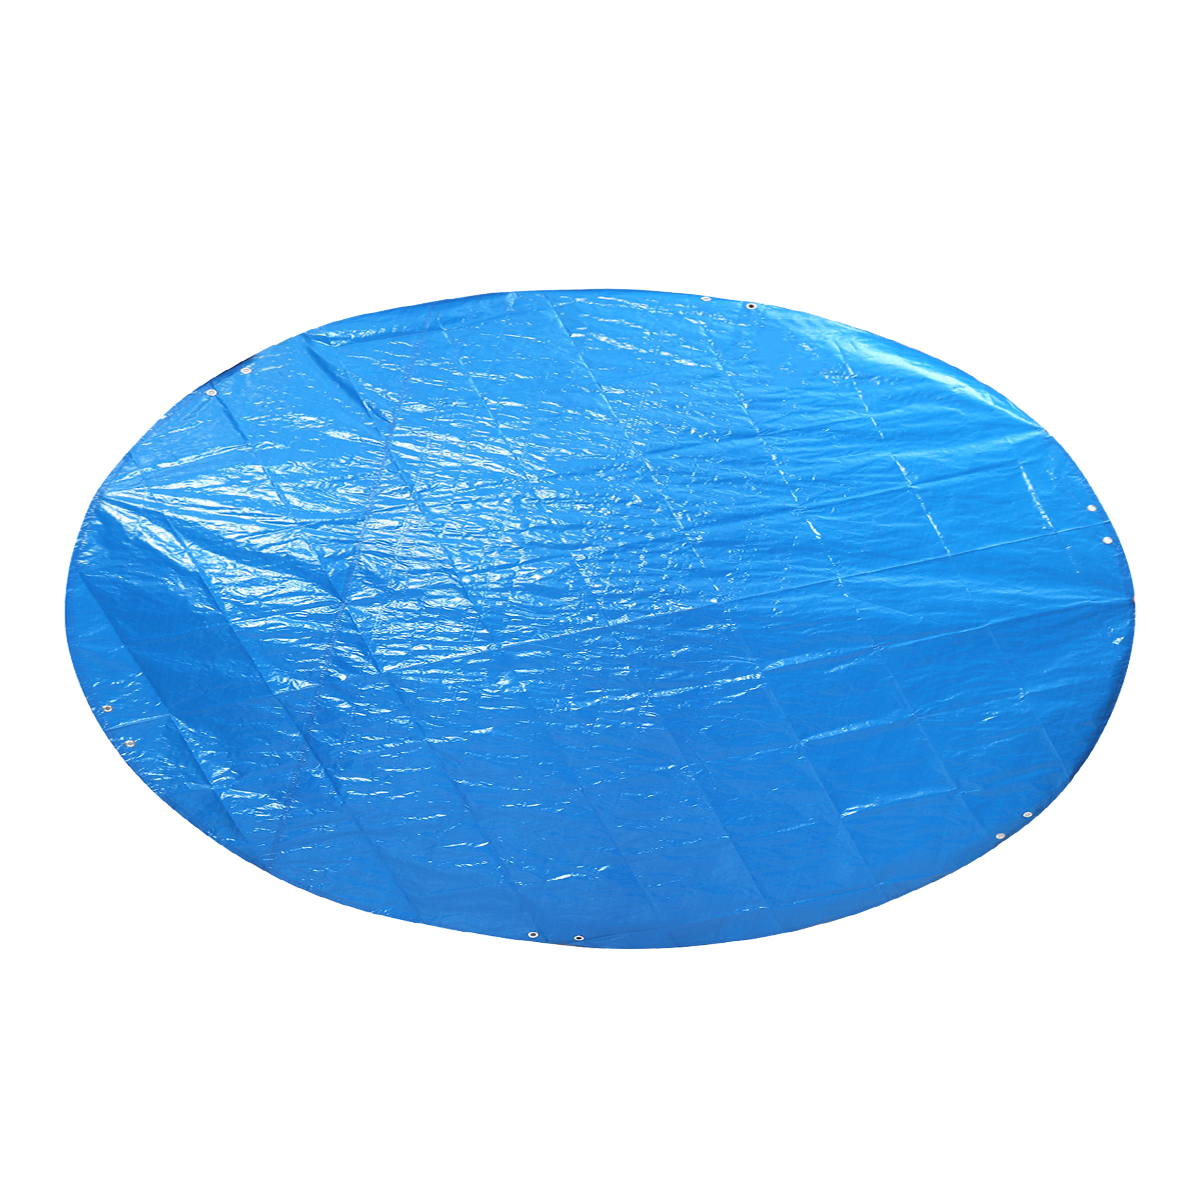 15ft-Inflatable-Swimming-Pool-Protective-Cover-Dustproof-Protection-Mat-For-Outdoor-Backyard-Garden-1718614-5